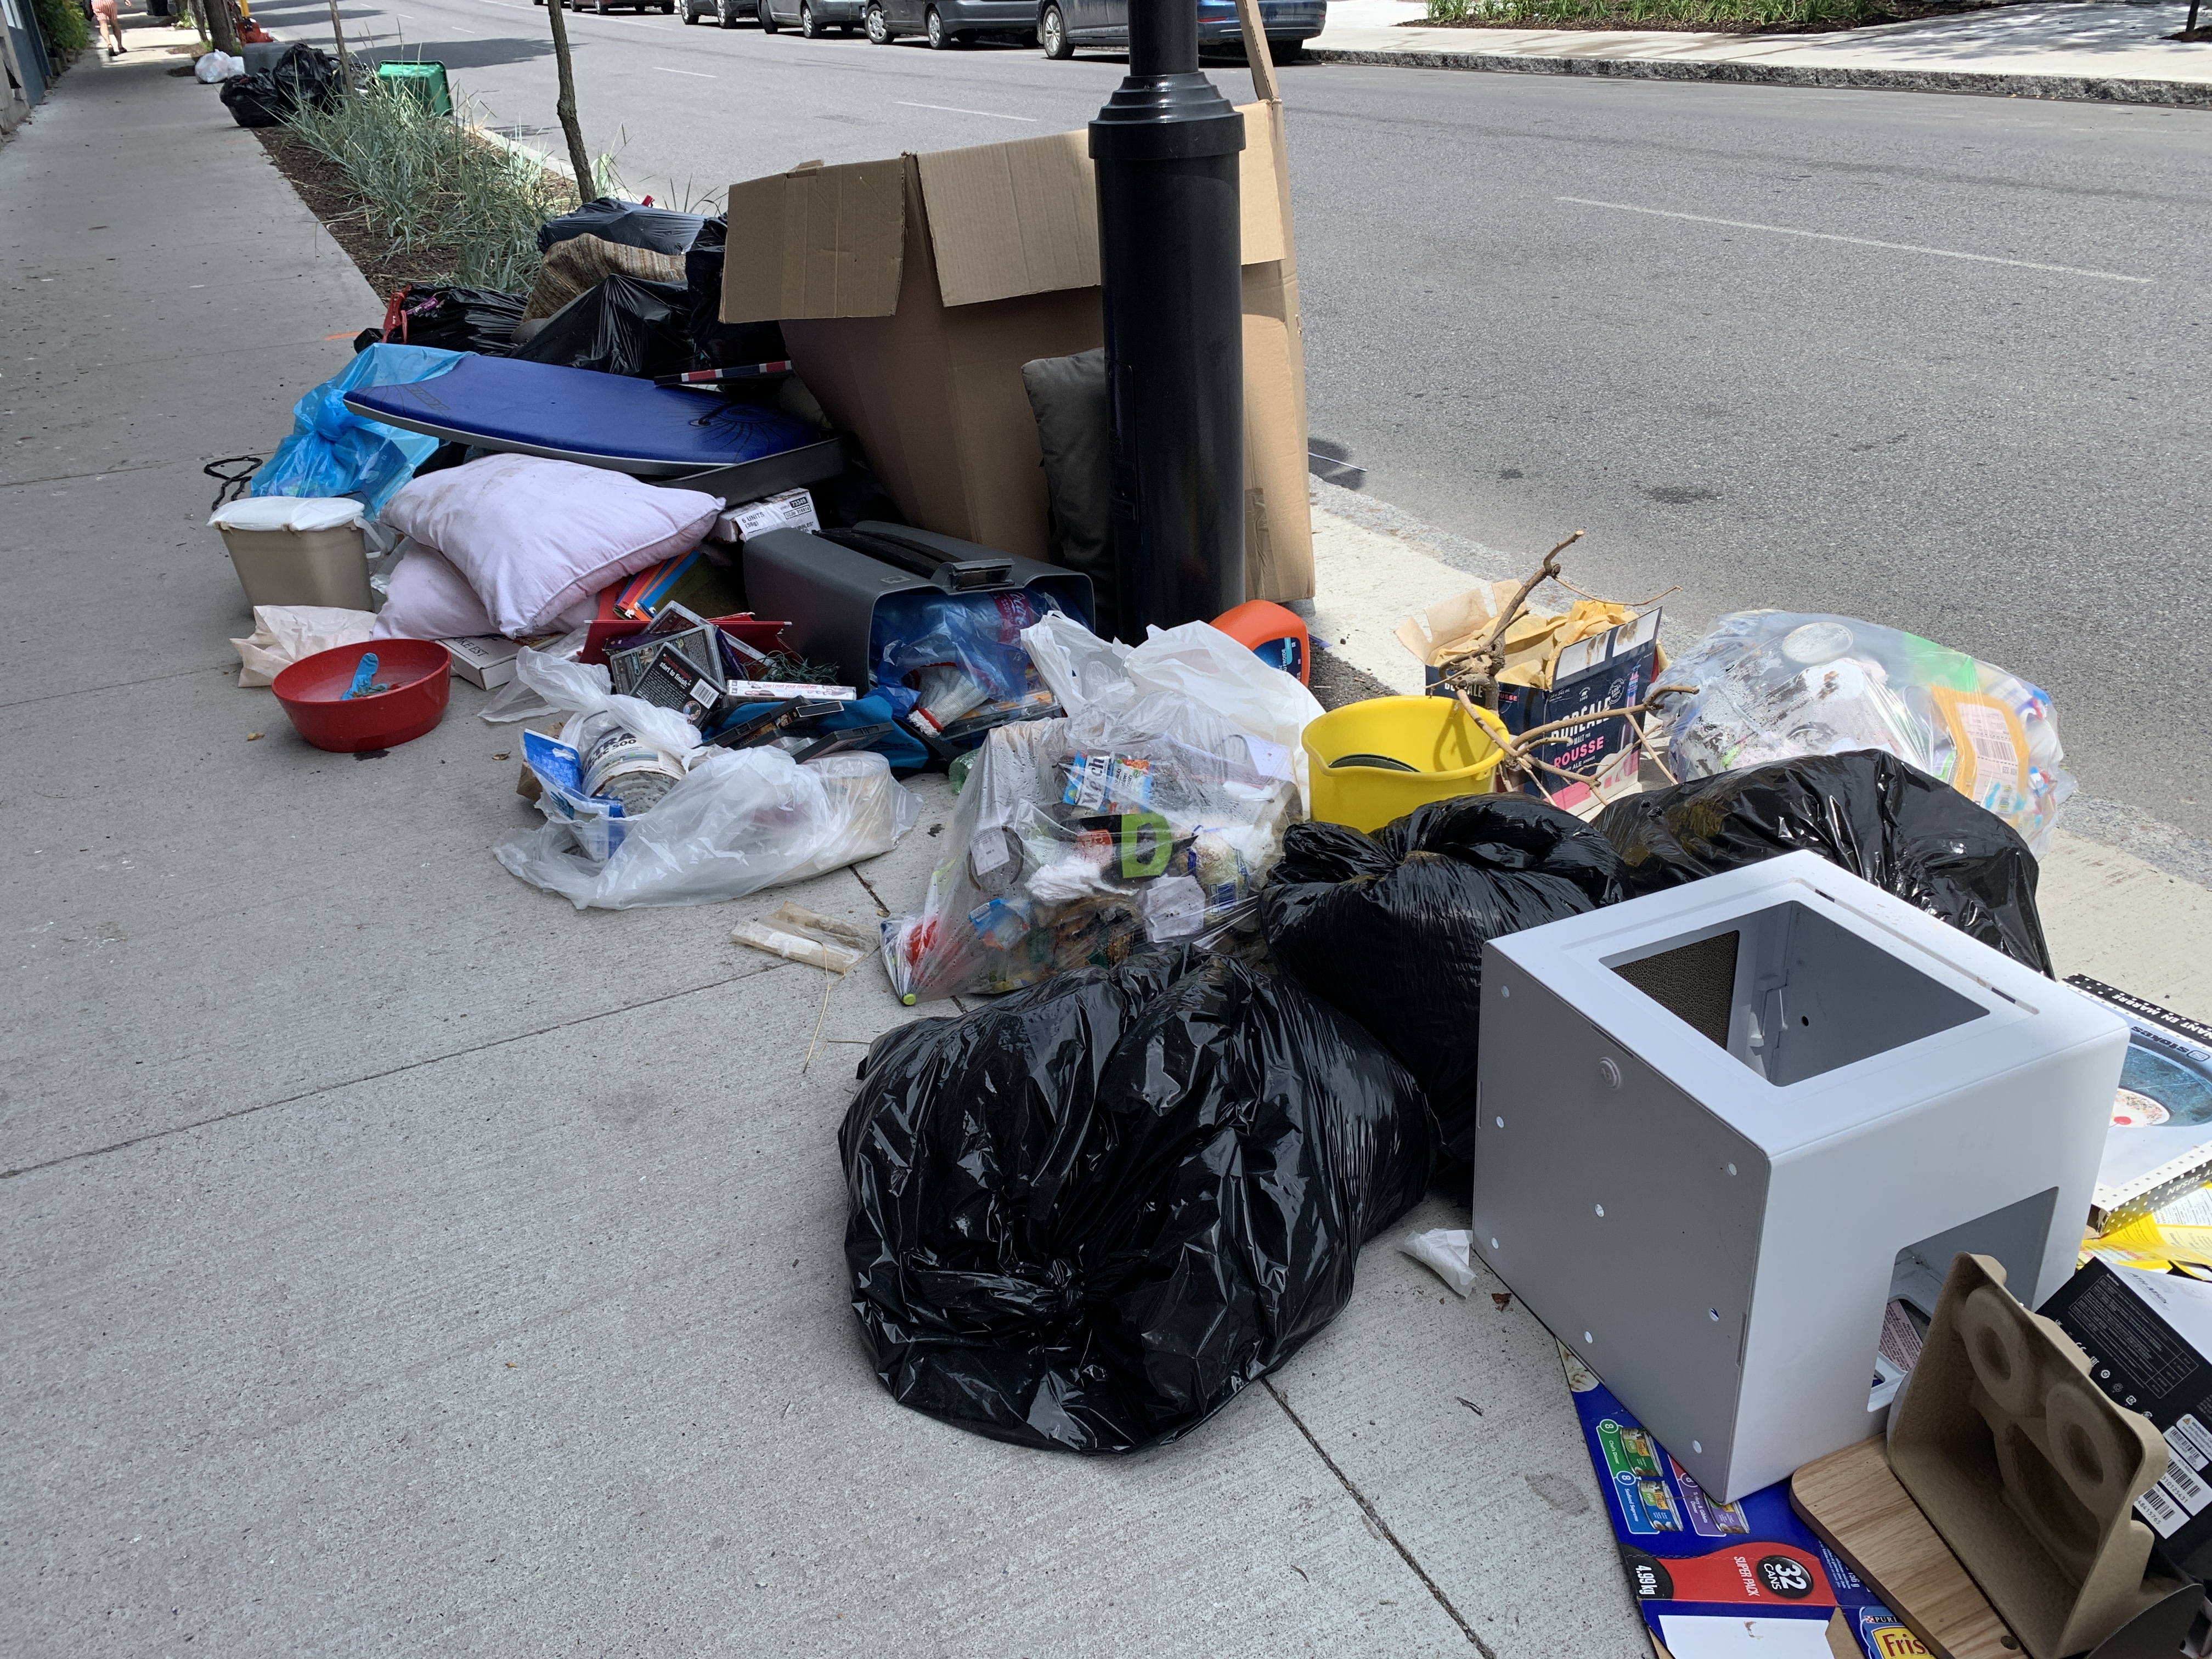 Montreal’s post-moving day cleanup well underway, expected to last 2 weeks